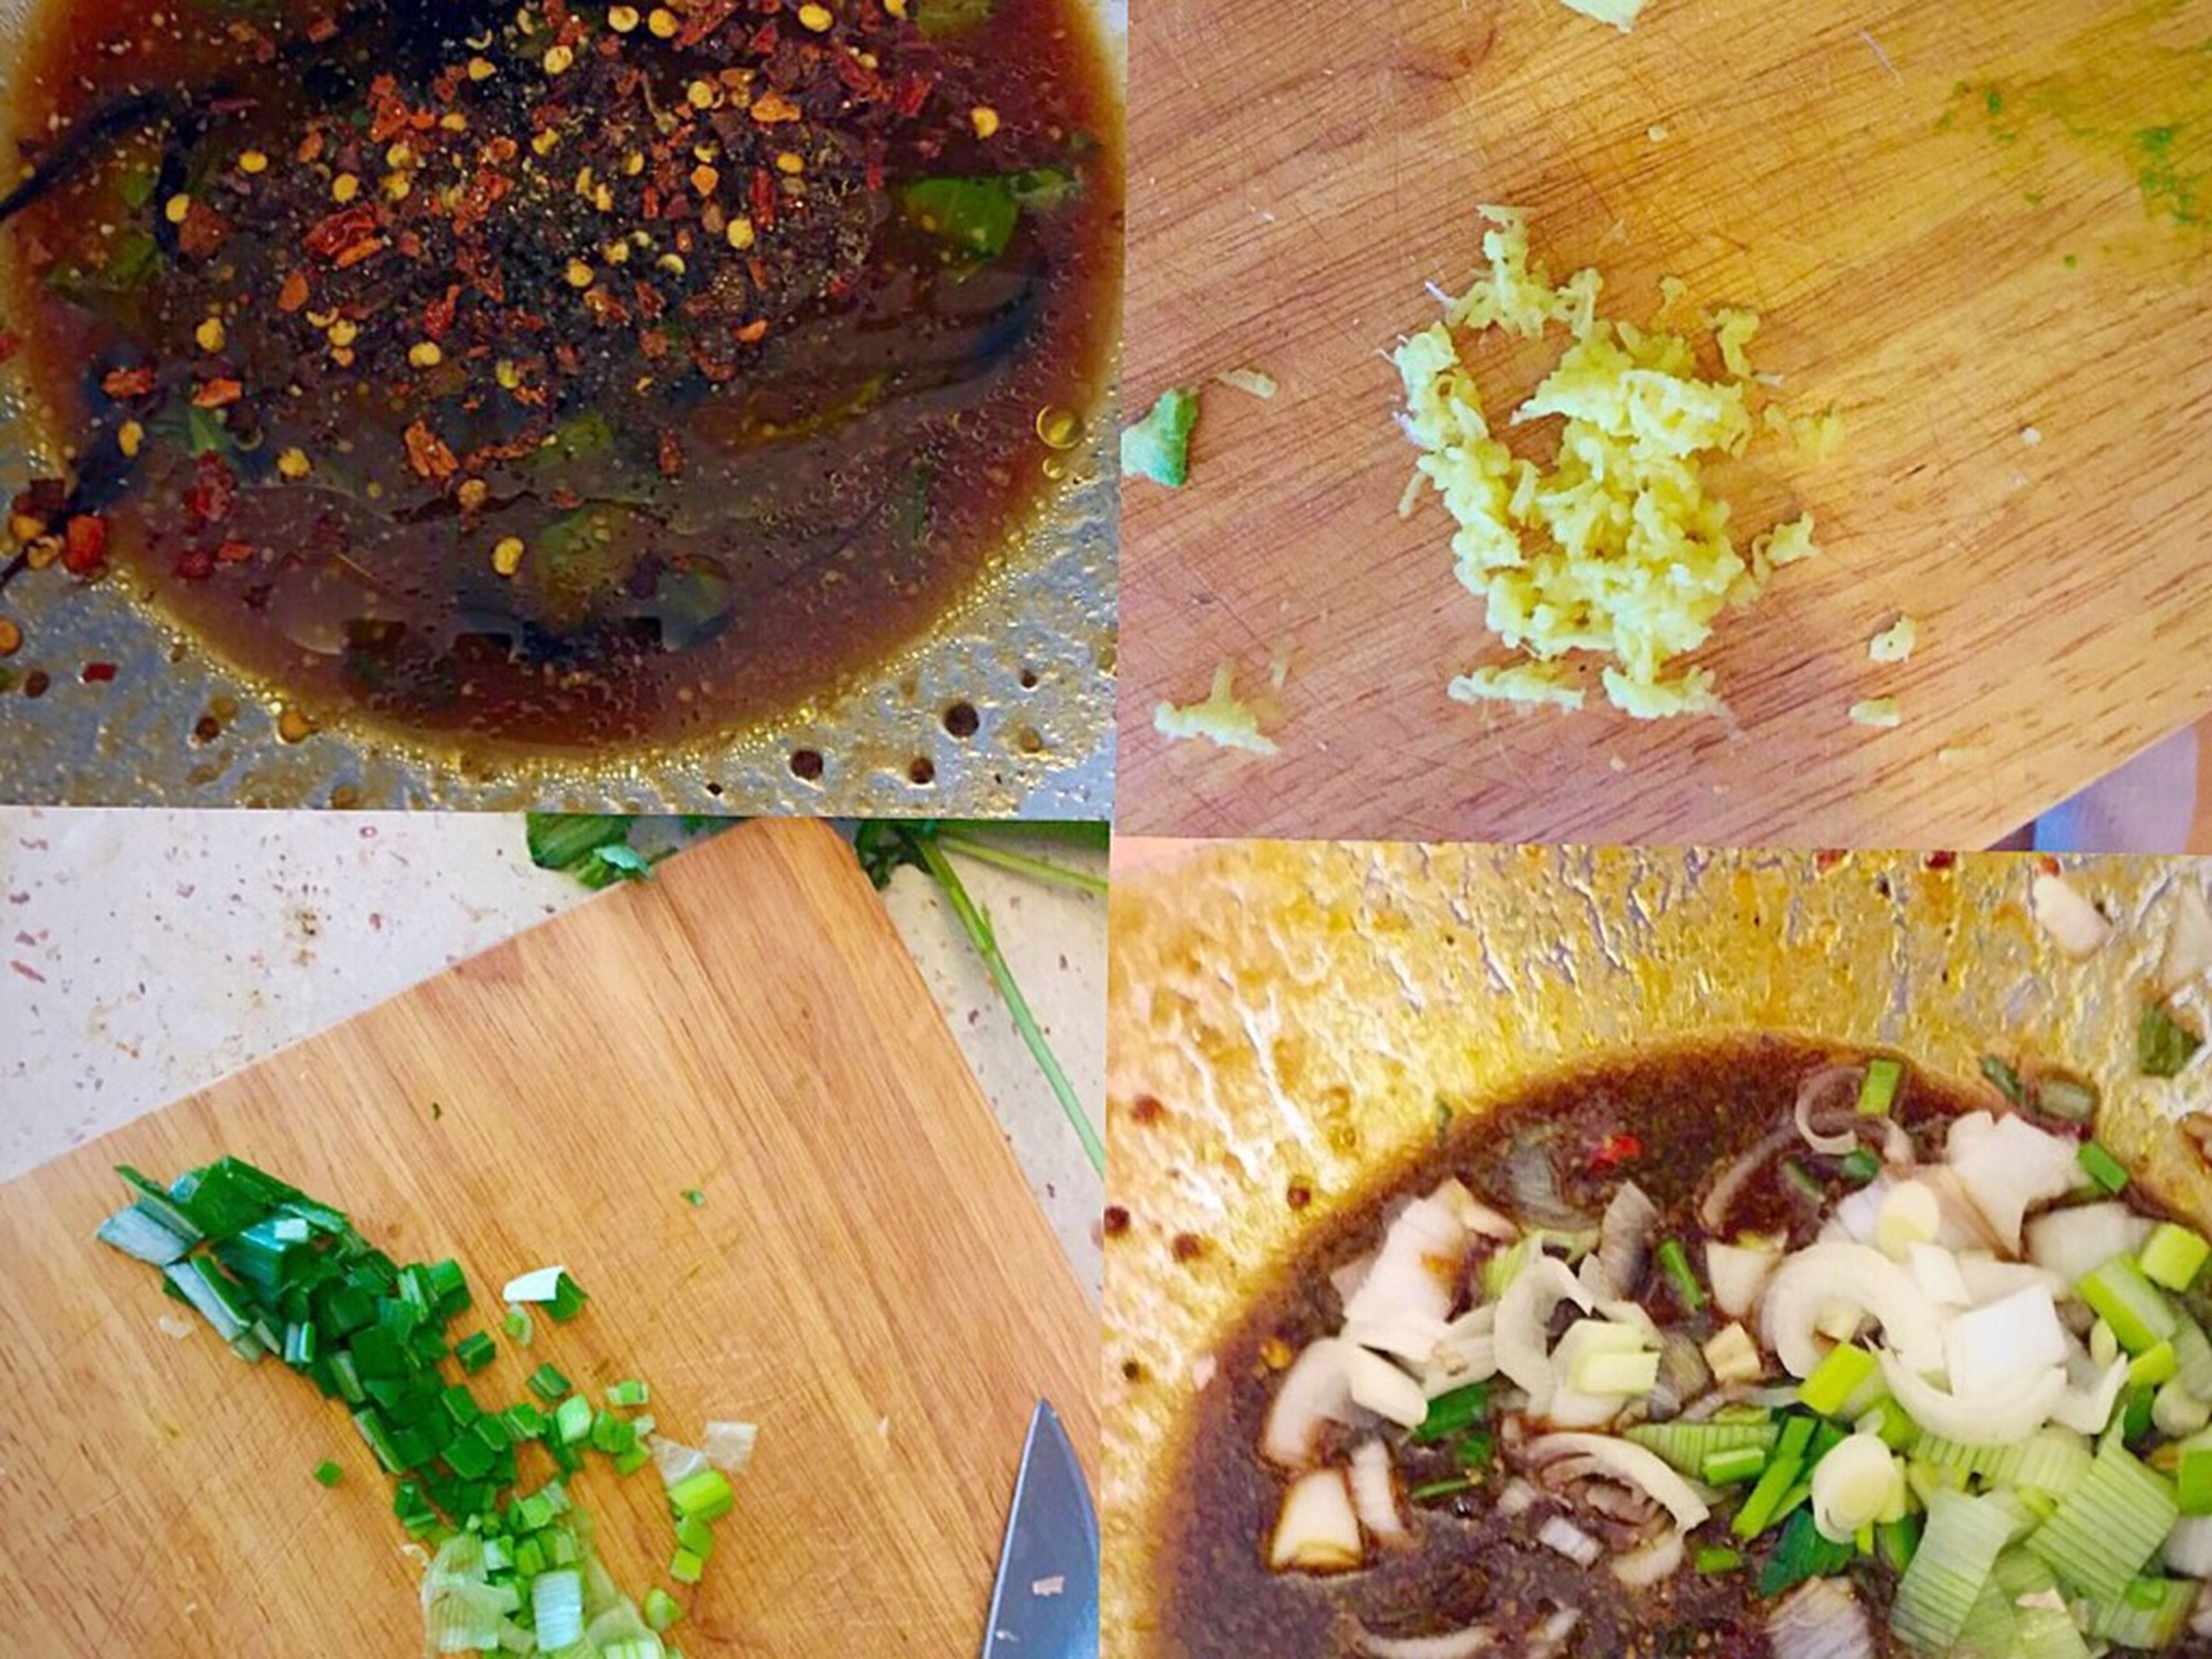 Add chili flakes, turmeric, and balsamic glaze to bowl. Chop scallions and grate ginger, add to the bowl, and mix.